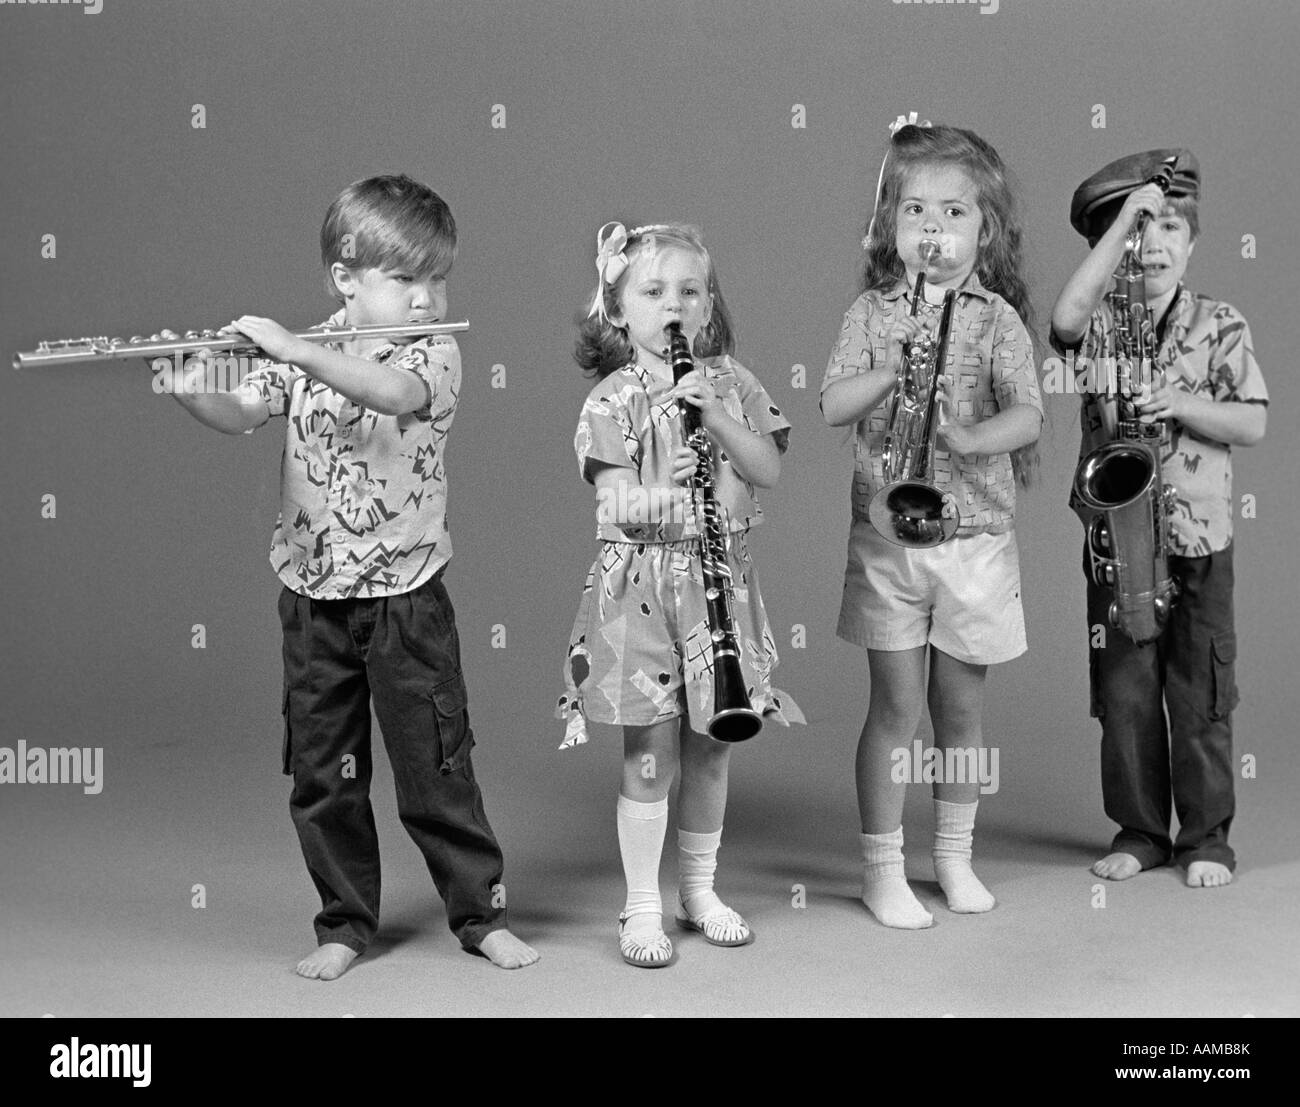 TWO BOYS AND TWO GIRLS PLAYING FLUTE CLARINET TRUMPET AND SAXOPHONE INDOOR Stock Photo